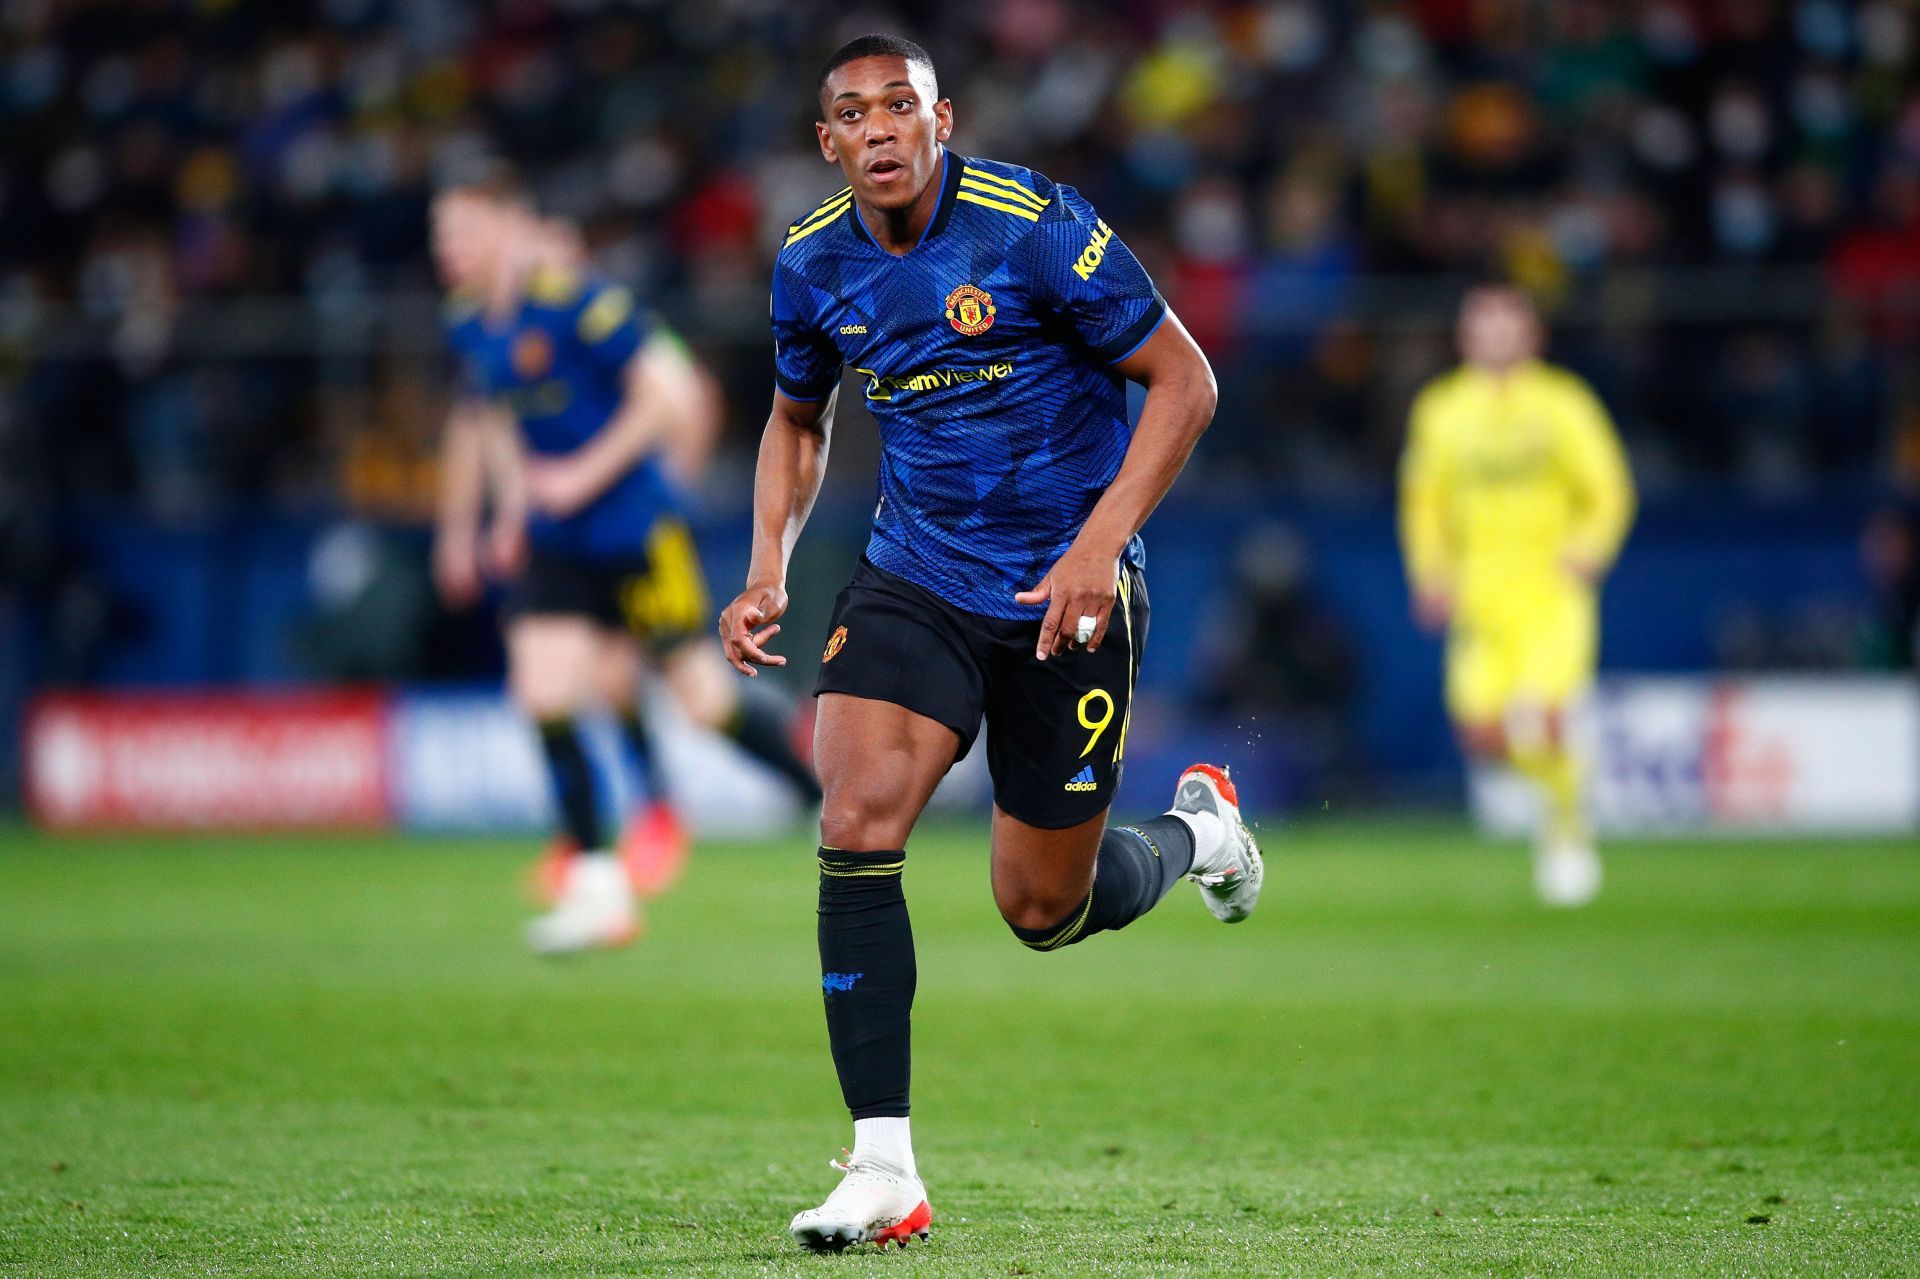 Frank McAvennie has advised United to offload Anthony Martial.